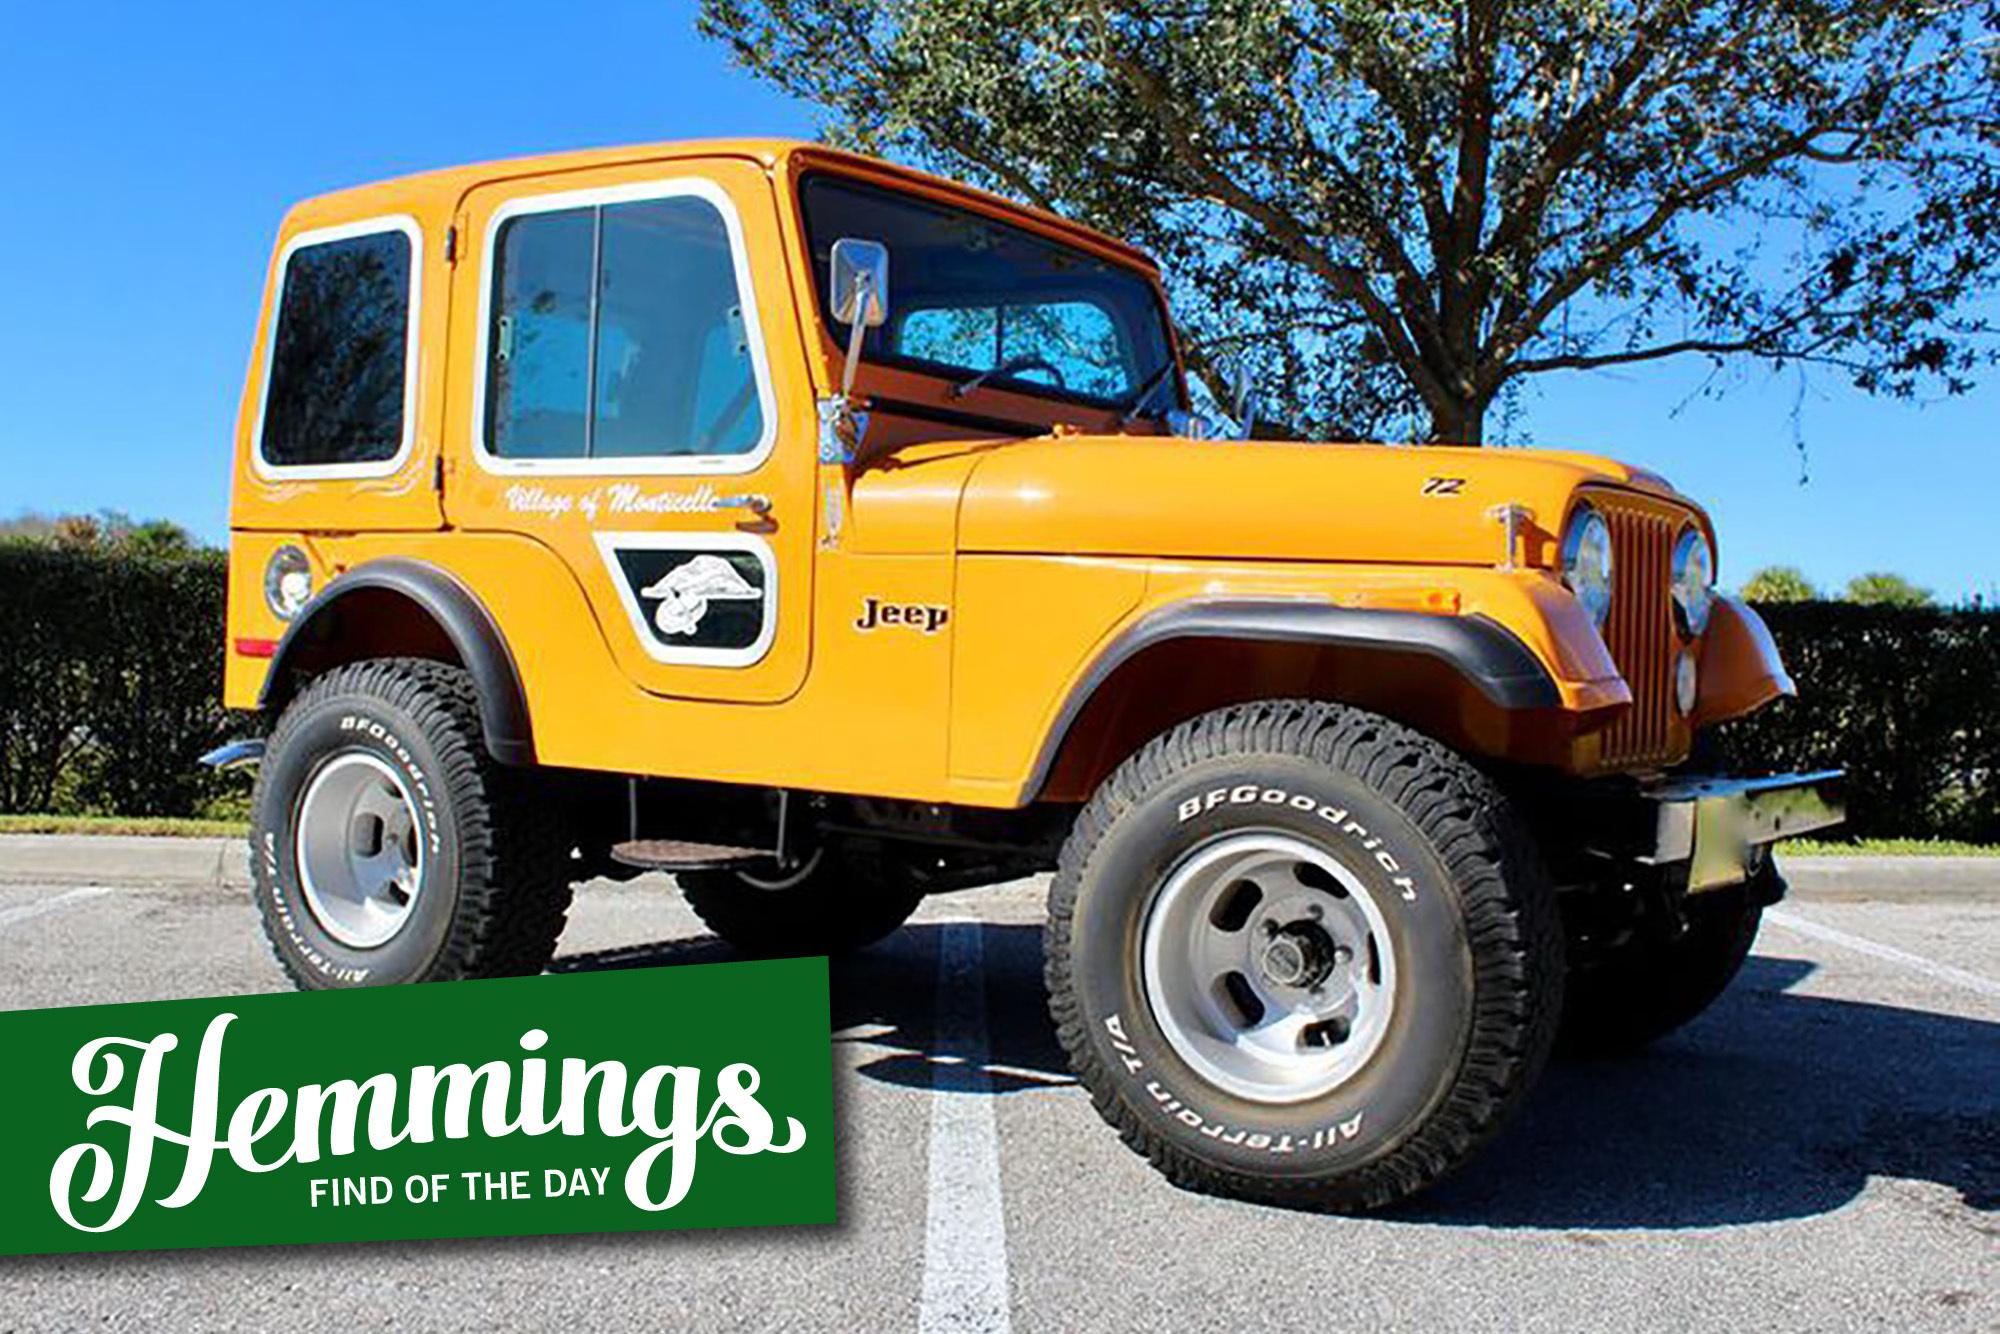 Vintage Tank Top Hardtop Is Just One of Many Period Modifications to This 1972 Jeep CJ-5